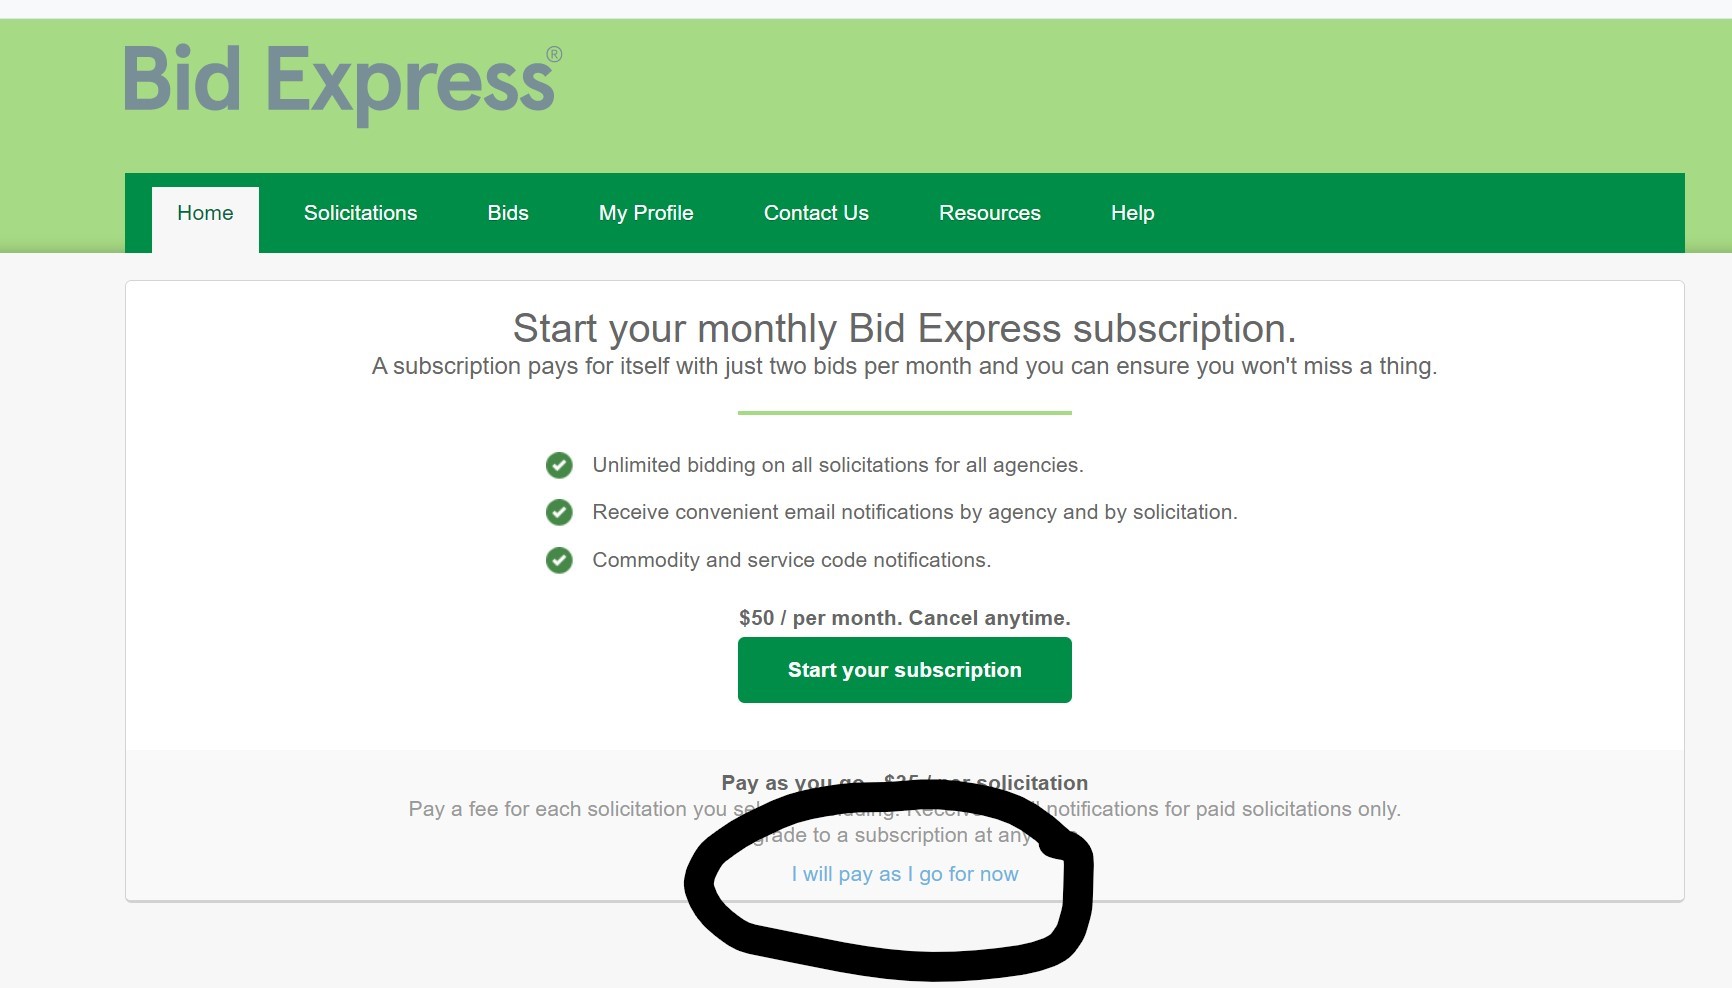 Select I will pay as I go for now setting up your Bid Express account subscription